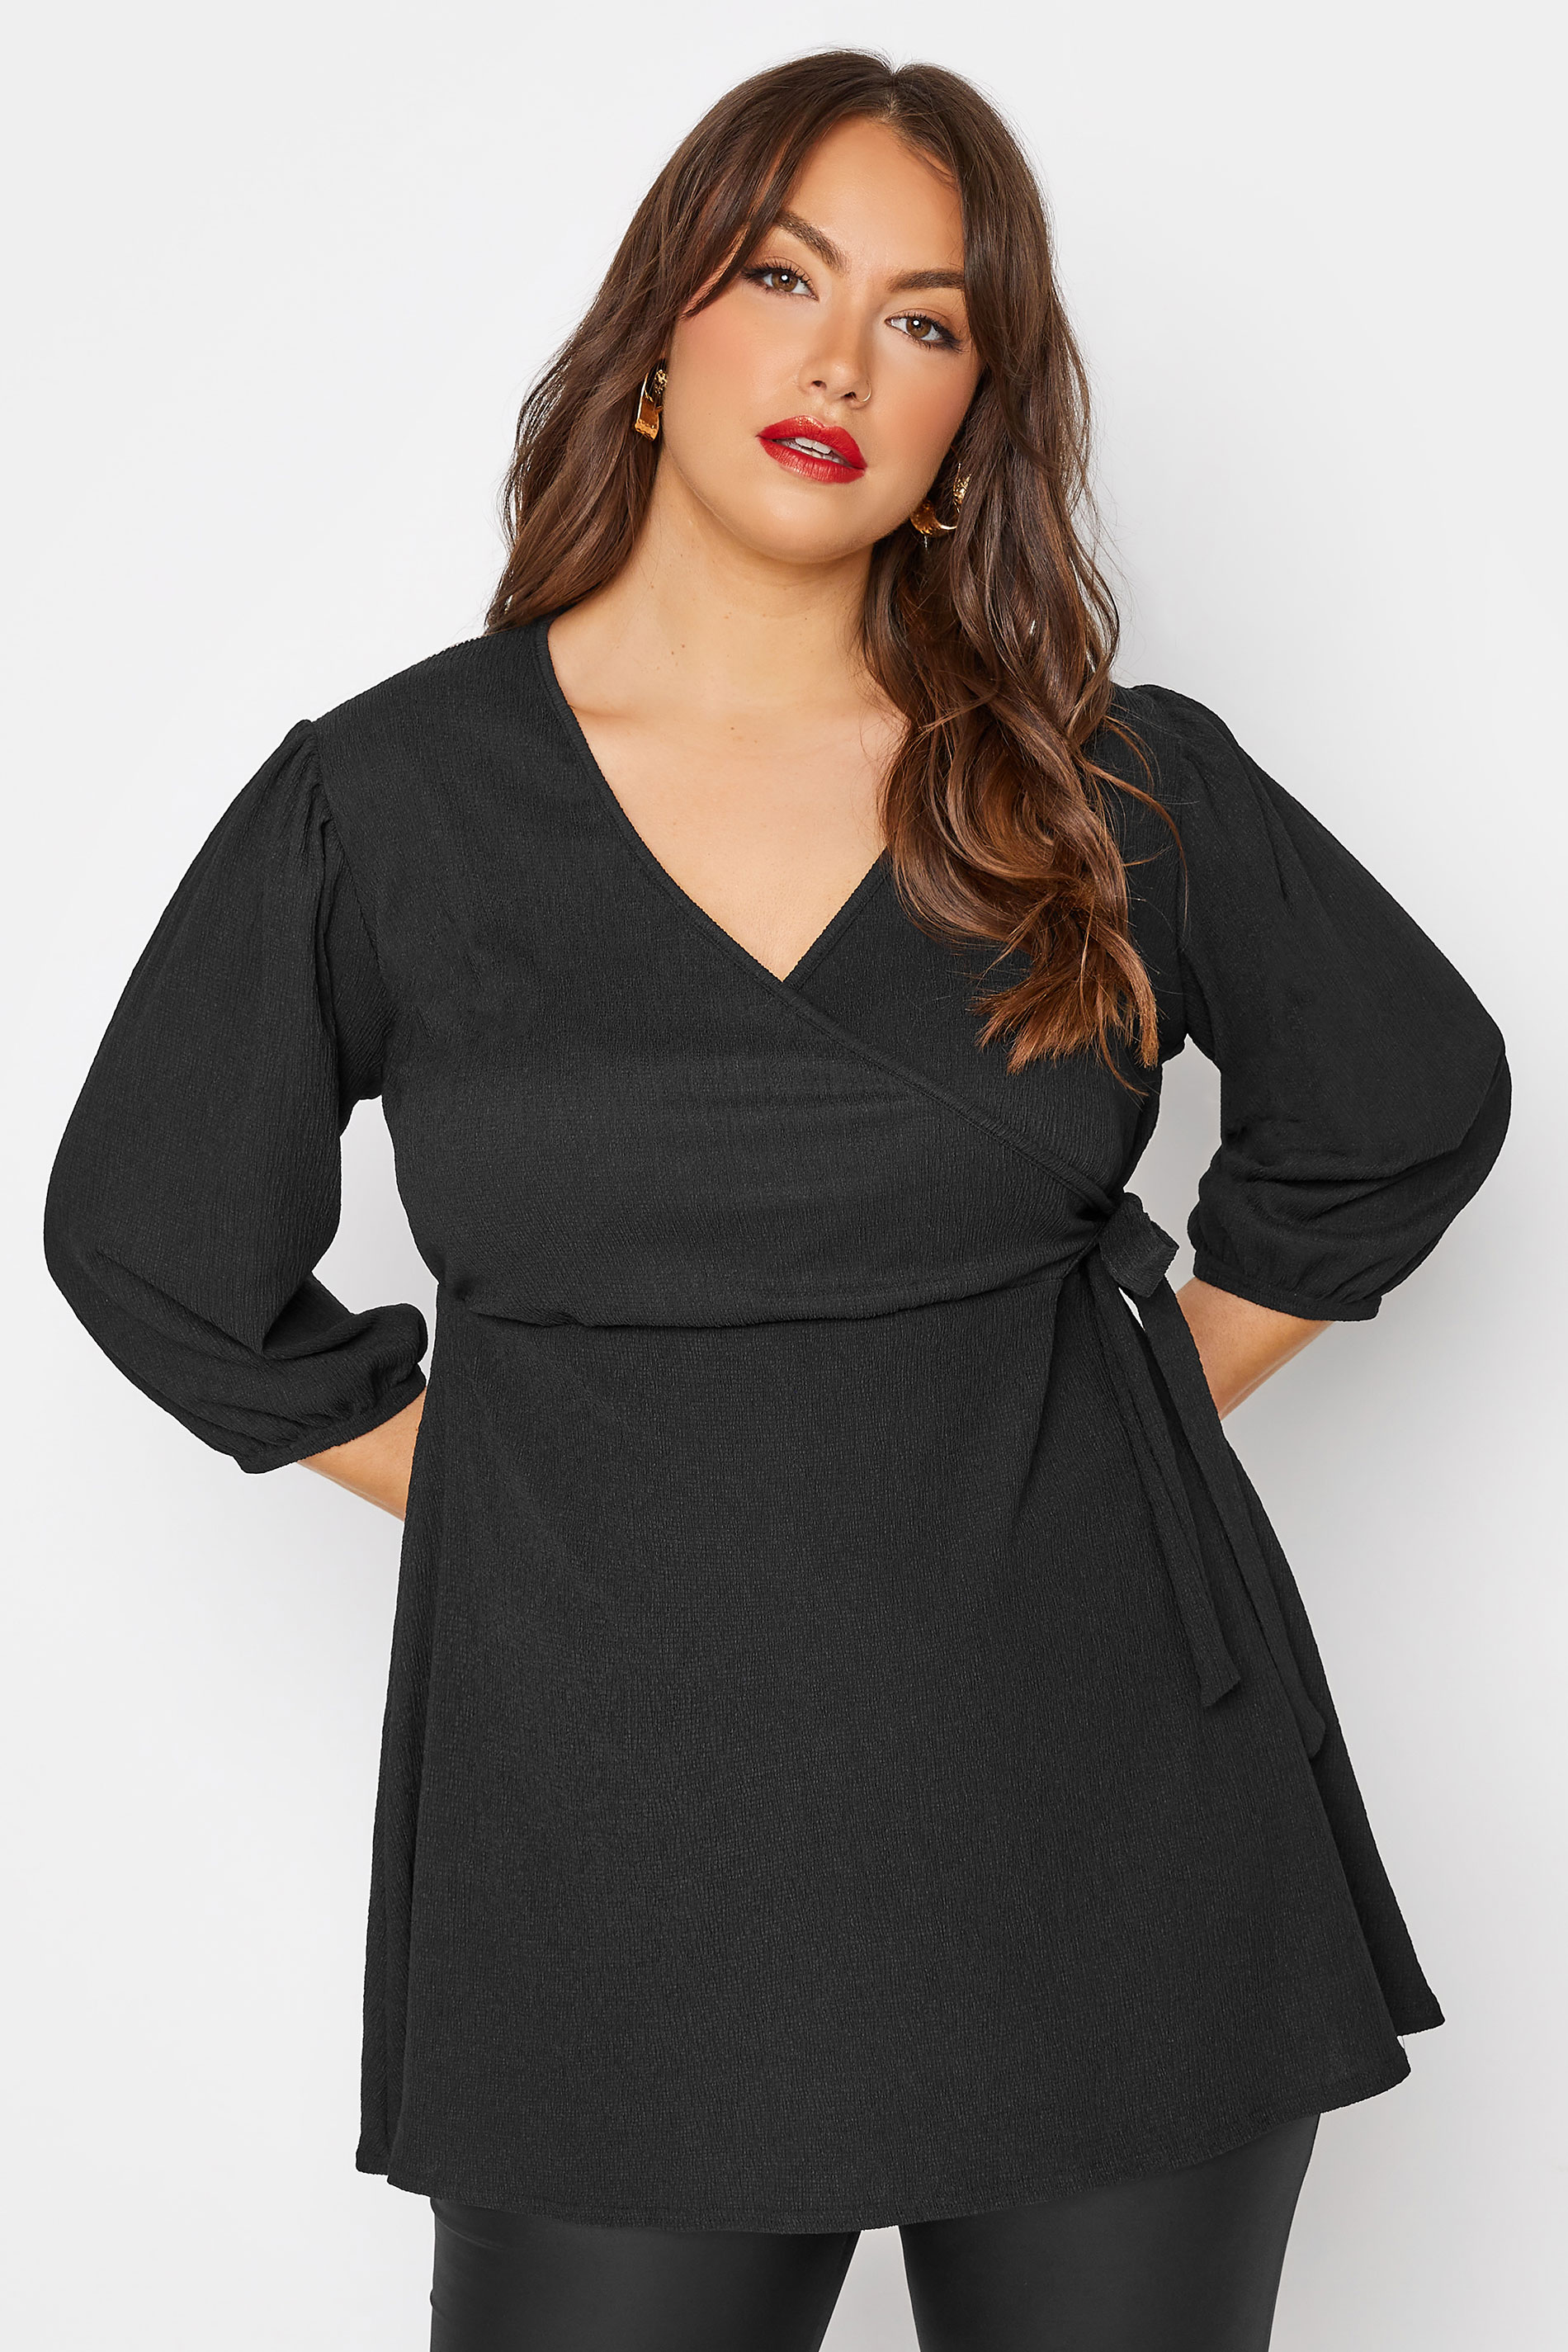 LIMITED COLLECTION Curve Black Crinkle Wrap Top_AR.jpg